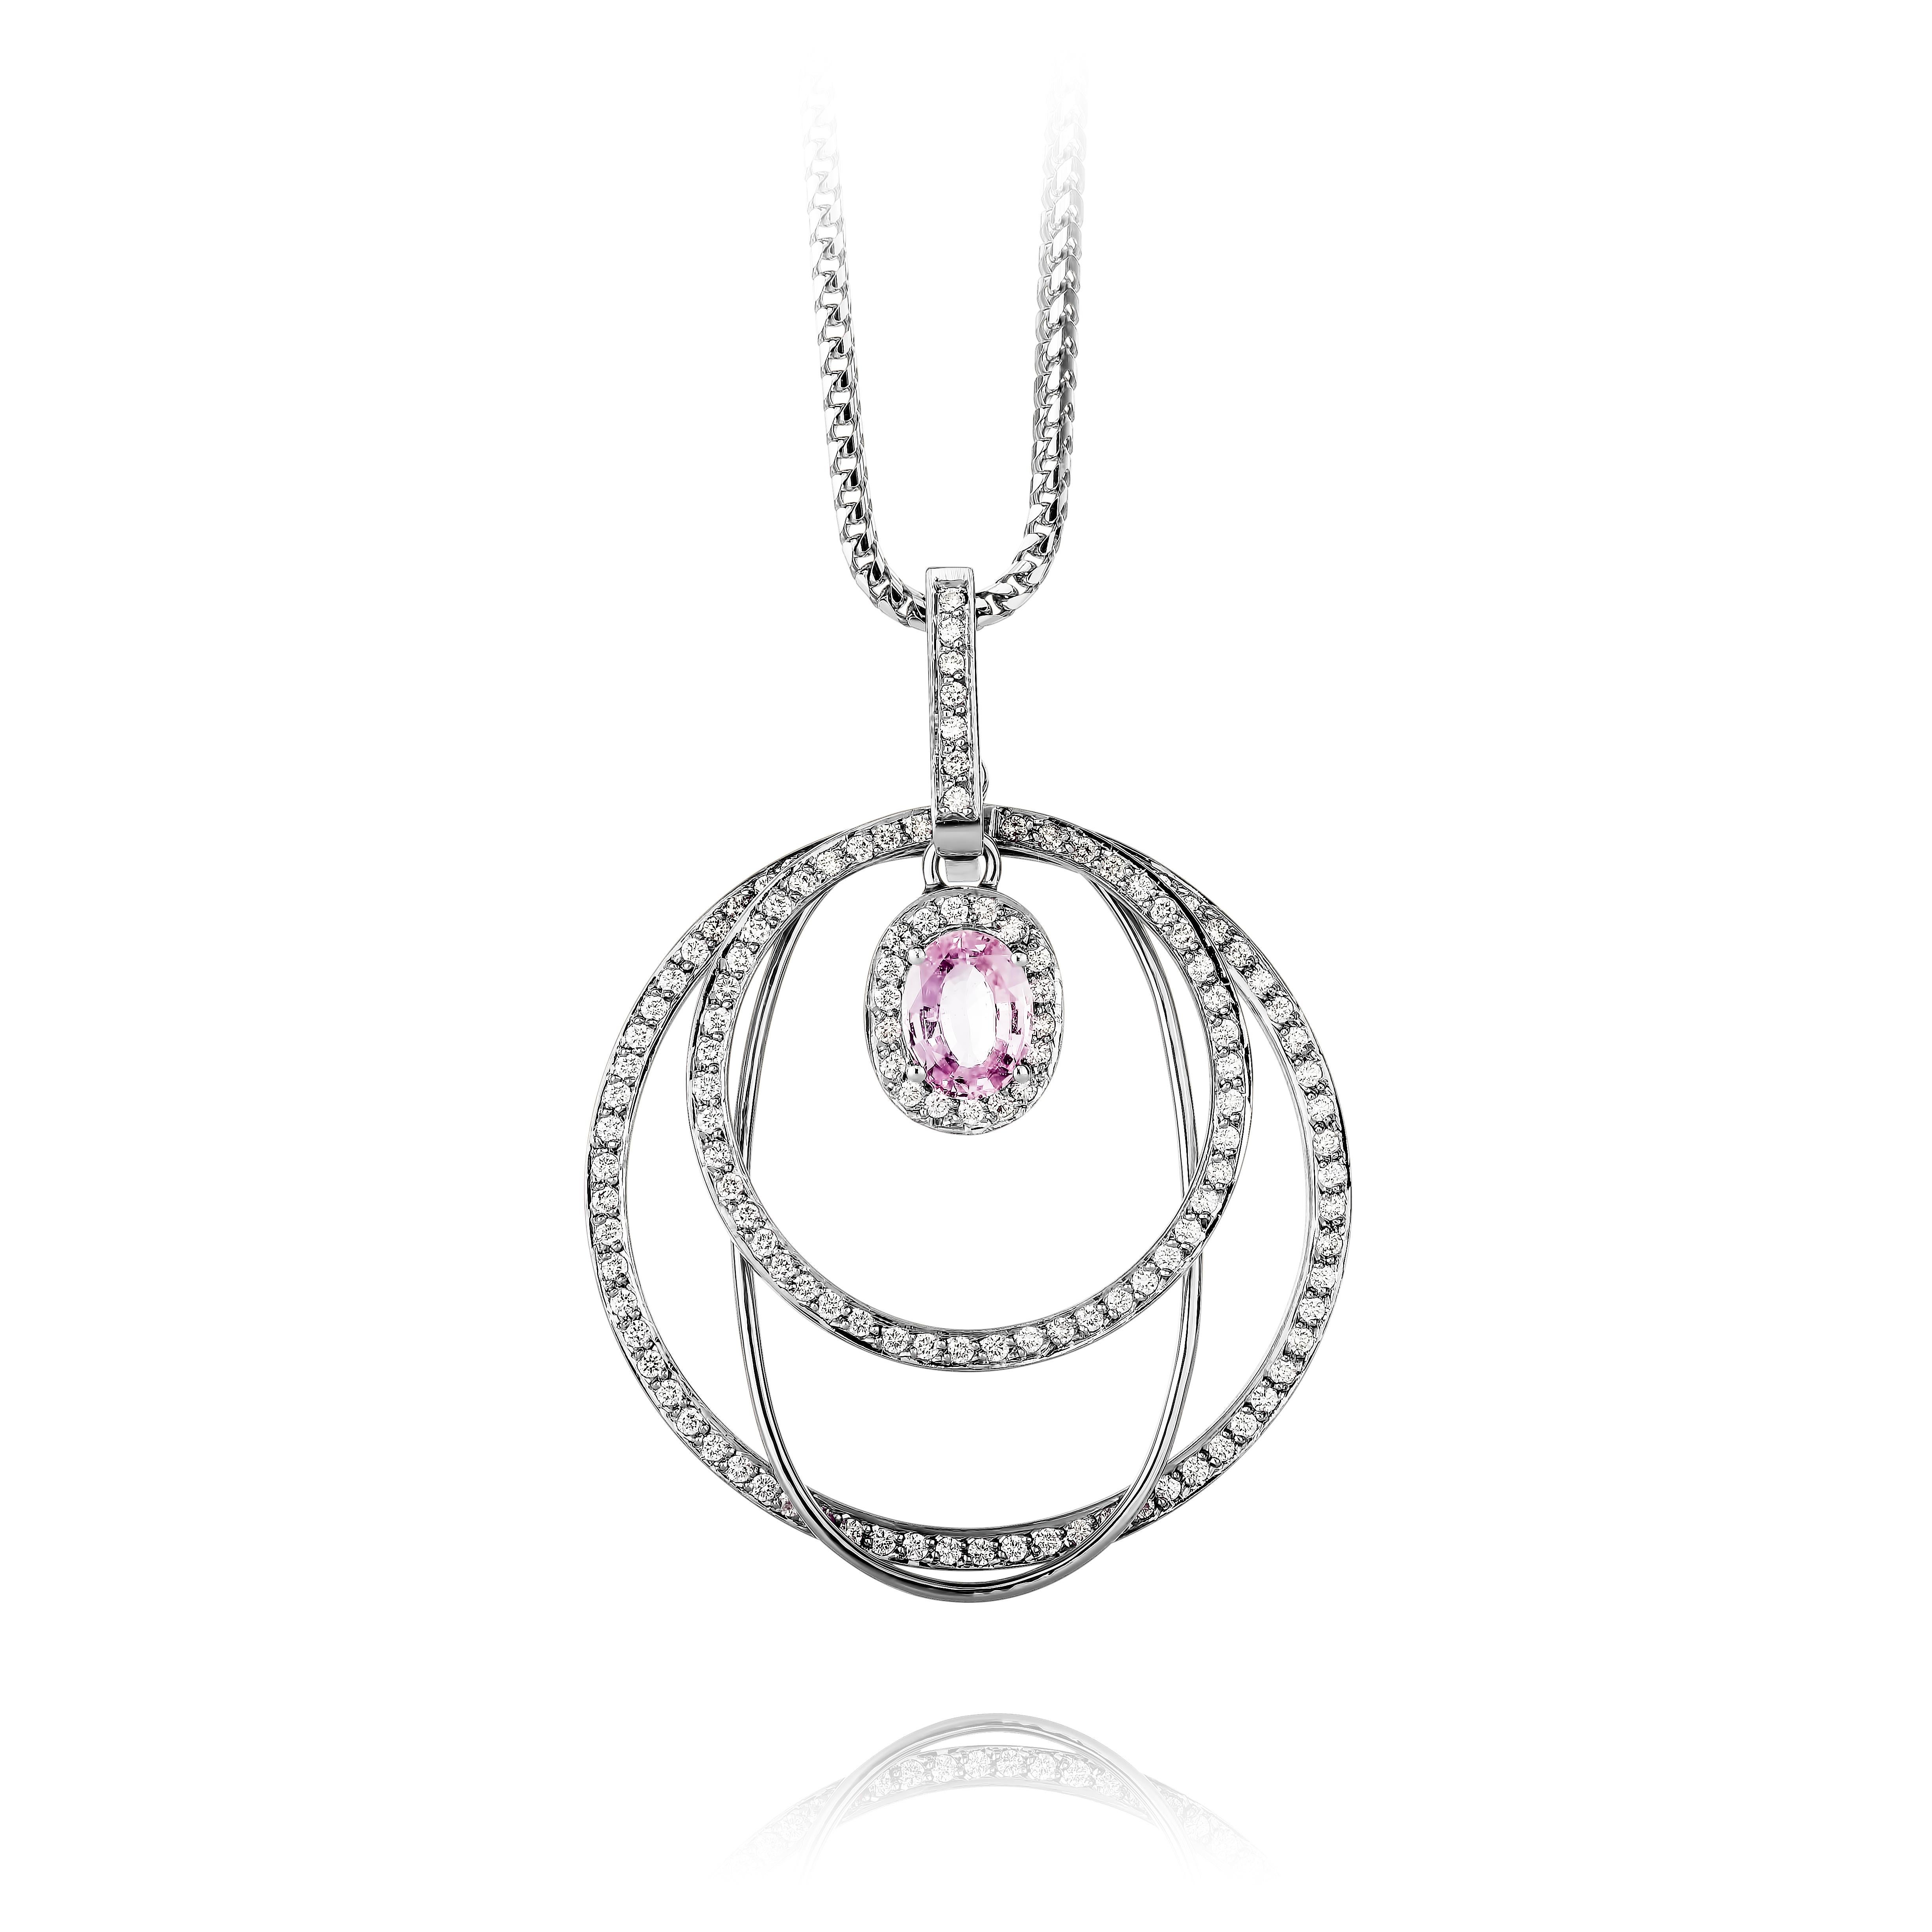 Contemporary 2.08 Carat Pink Sapphire and 1.37 Carat Diamond White Gold Pendant Necklace For Sale